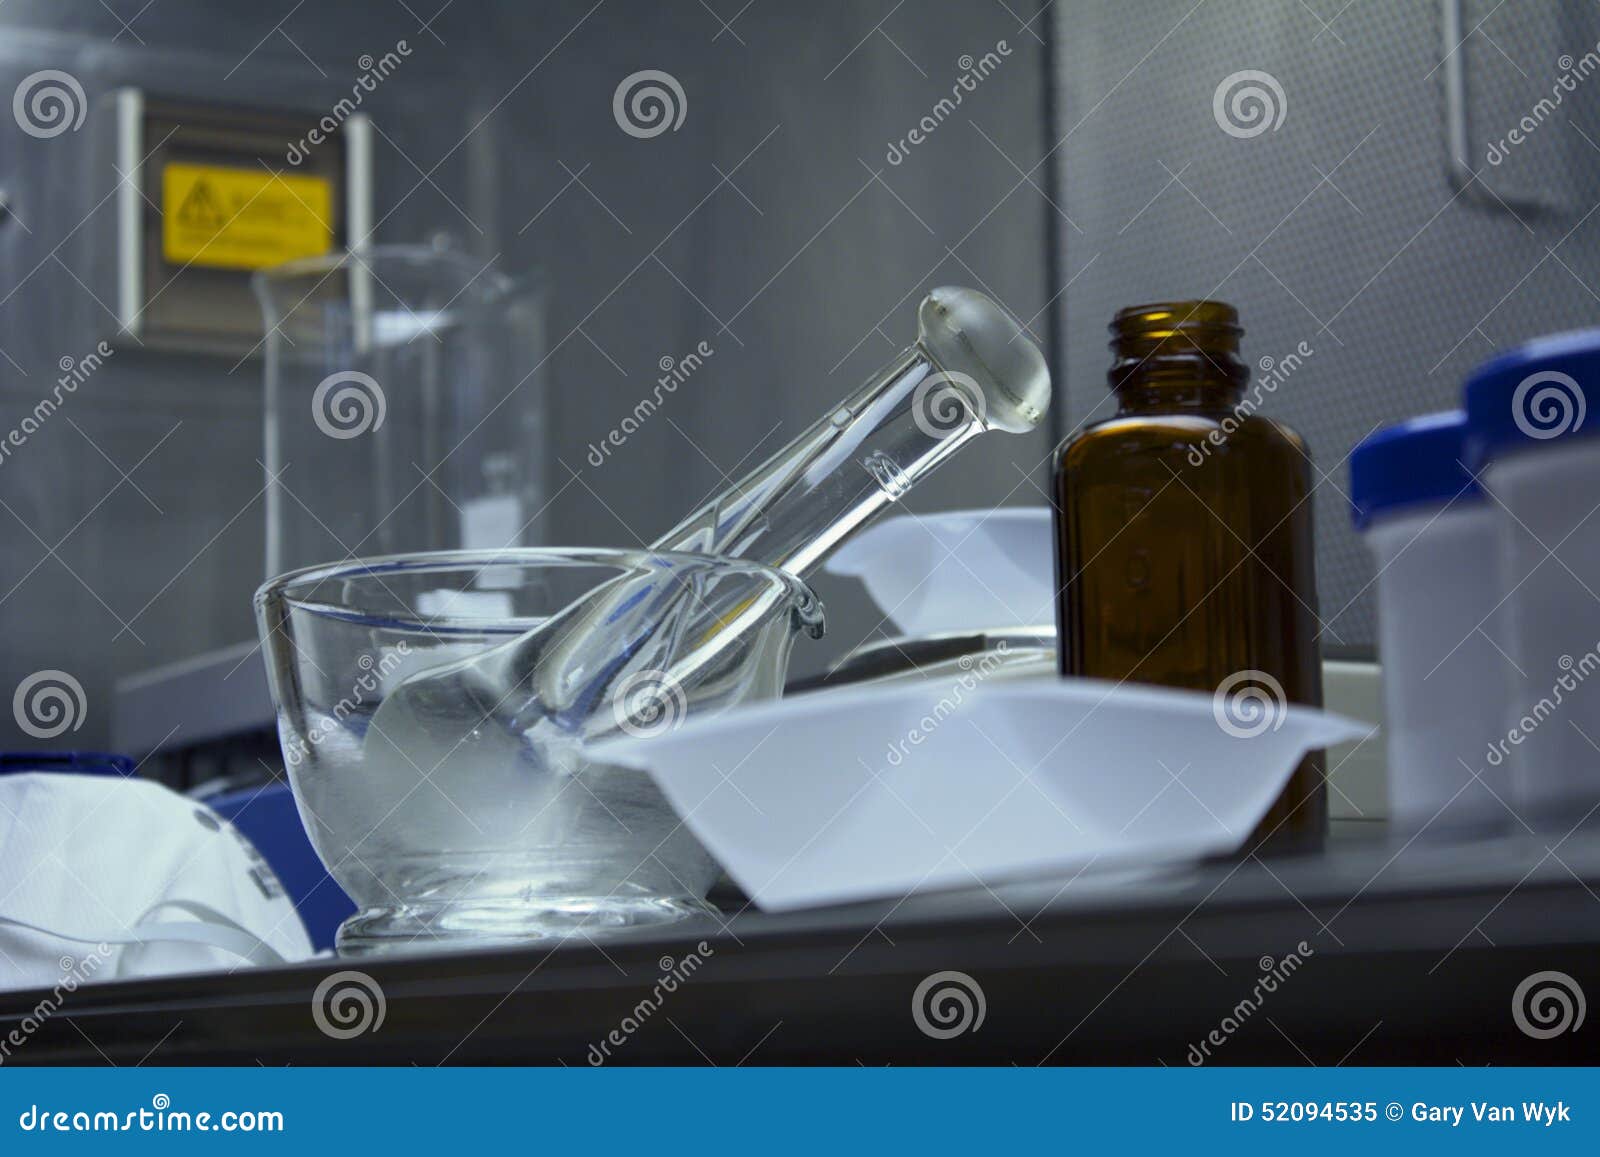 pharmaceutical compounding equipment ready for use